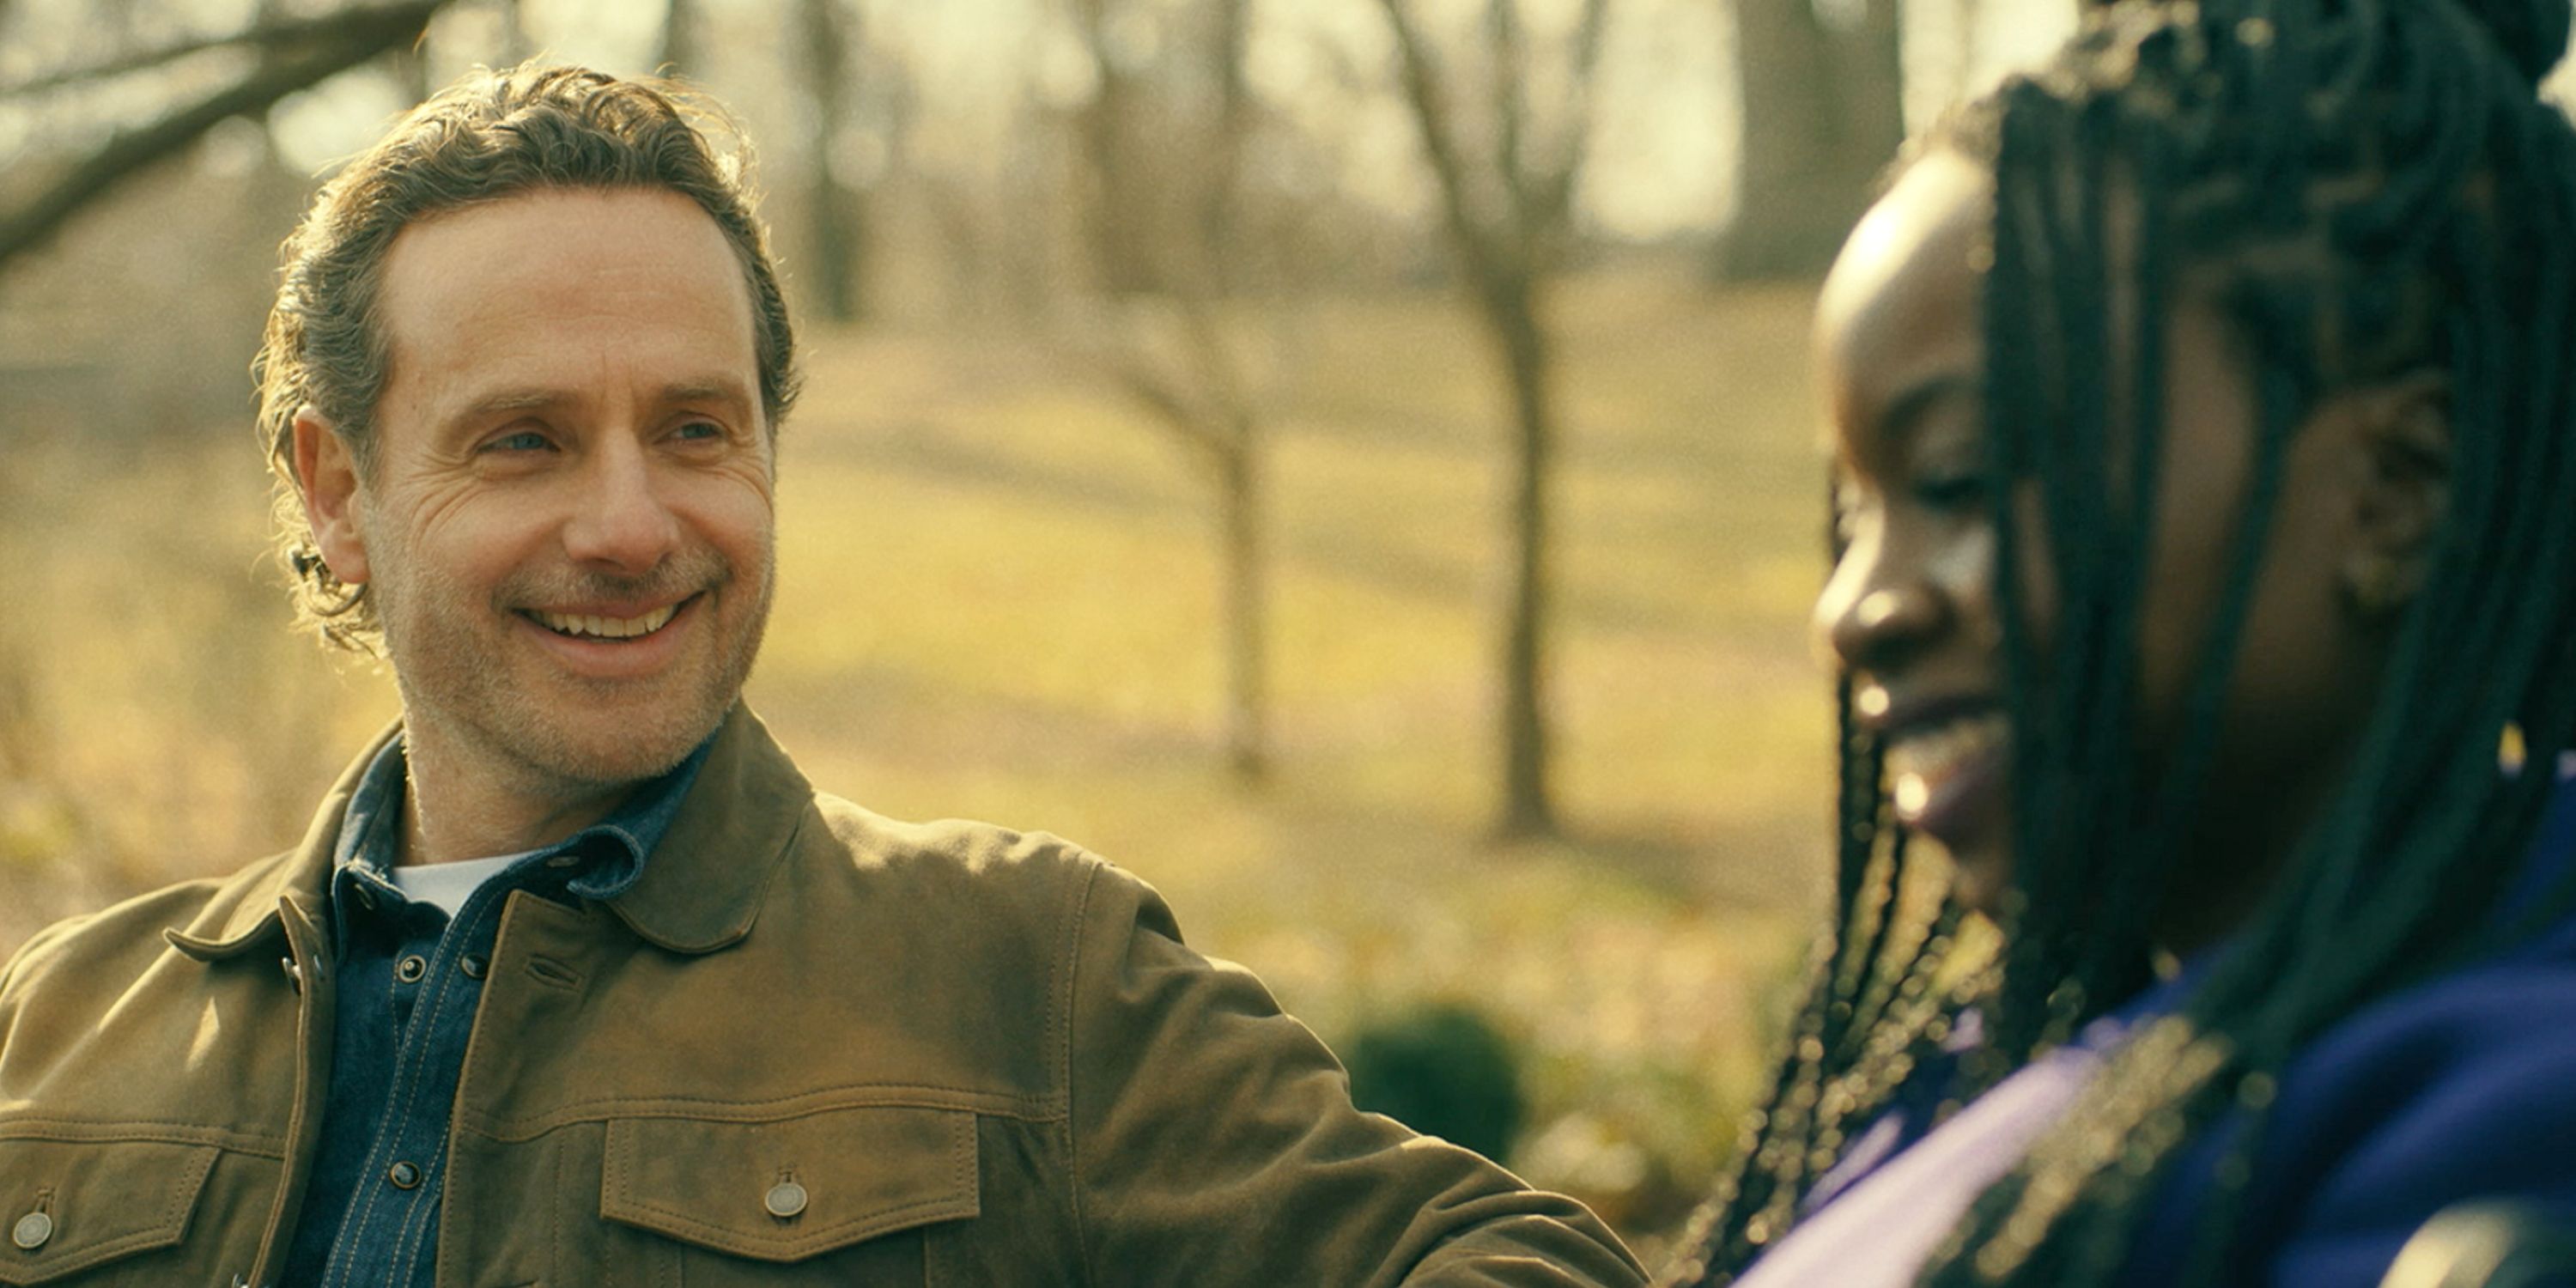 Andrew Lincoln as Rick Grimes and Danai Gurira as Michonne in Episode 2 of Season 1 of AMC's The Walking Dead: The Ones Who Live